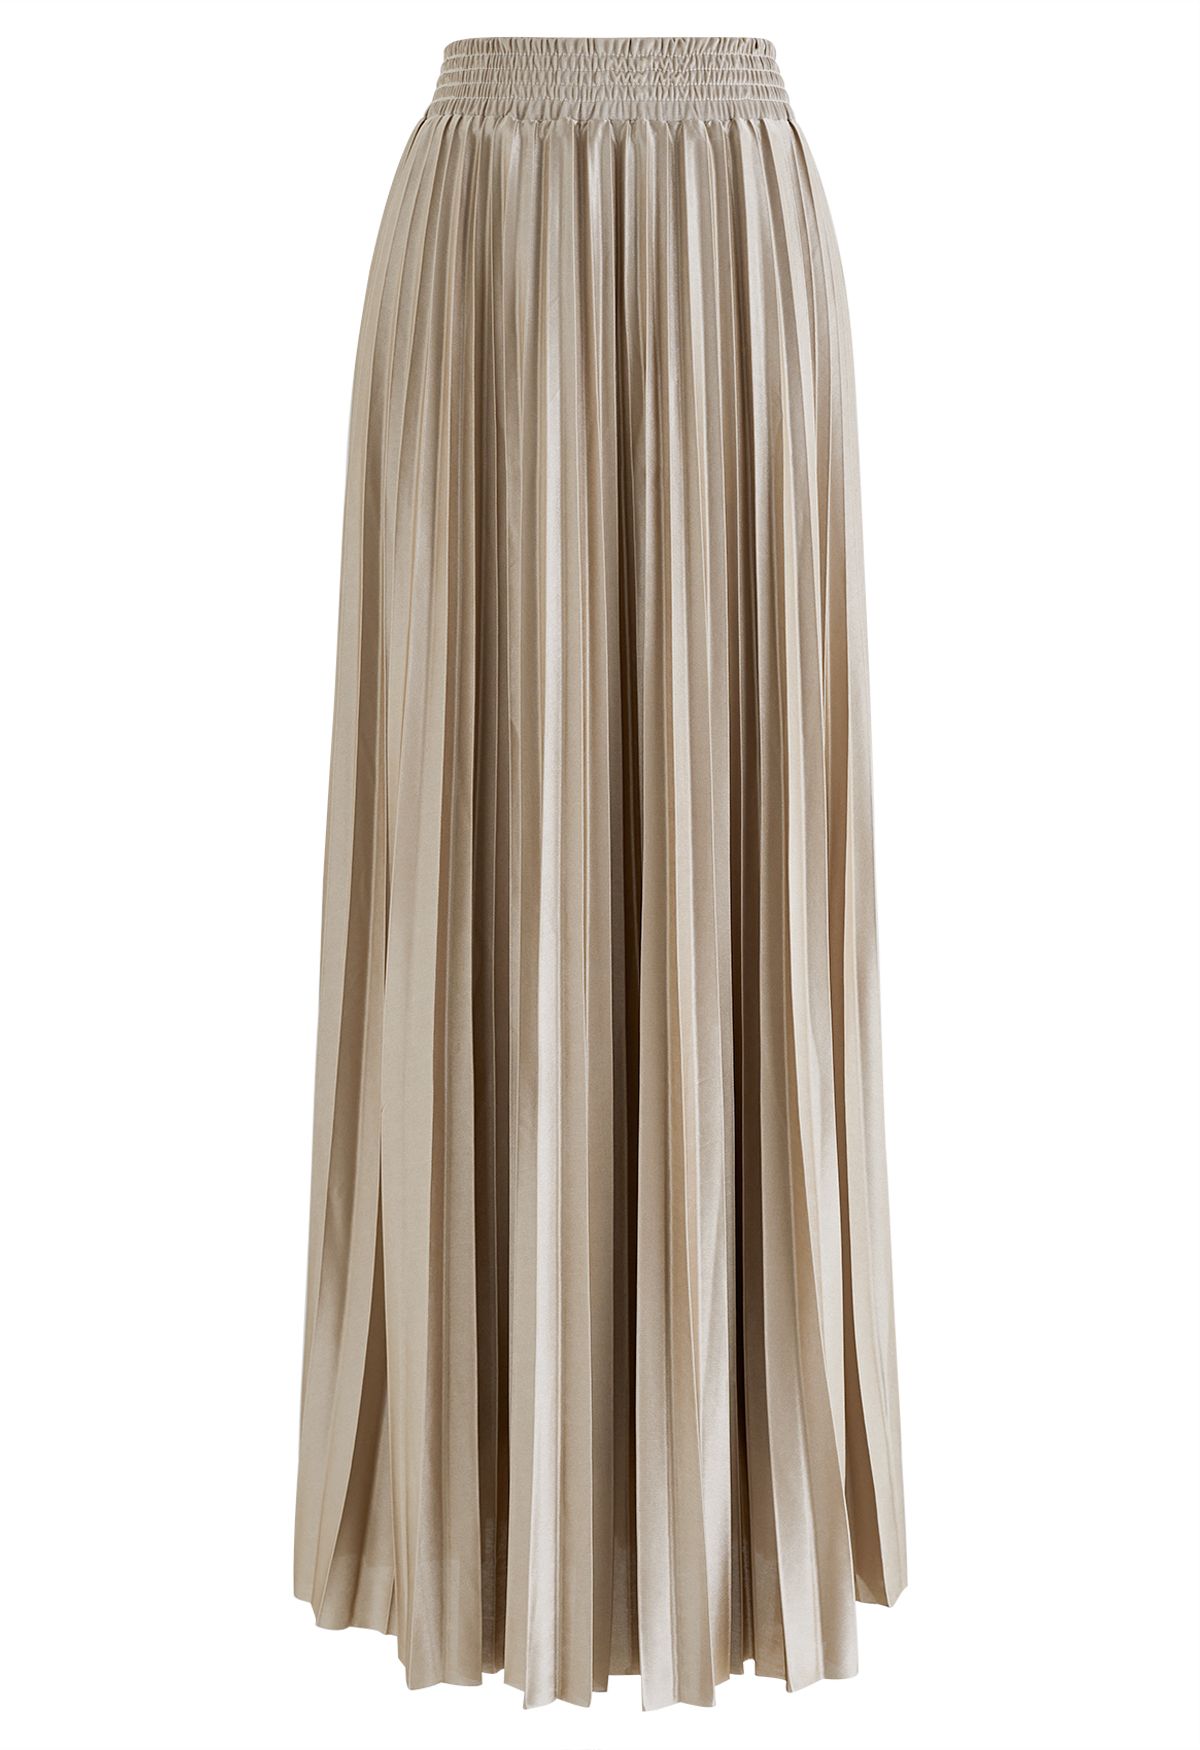 Glossy Pleated Maxi Skirt in Light Tan